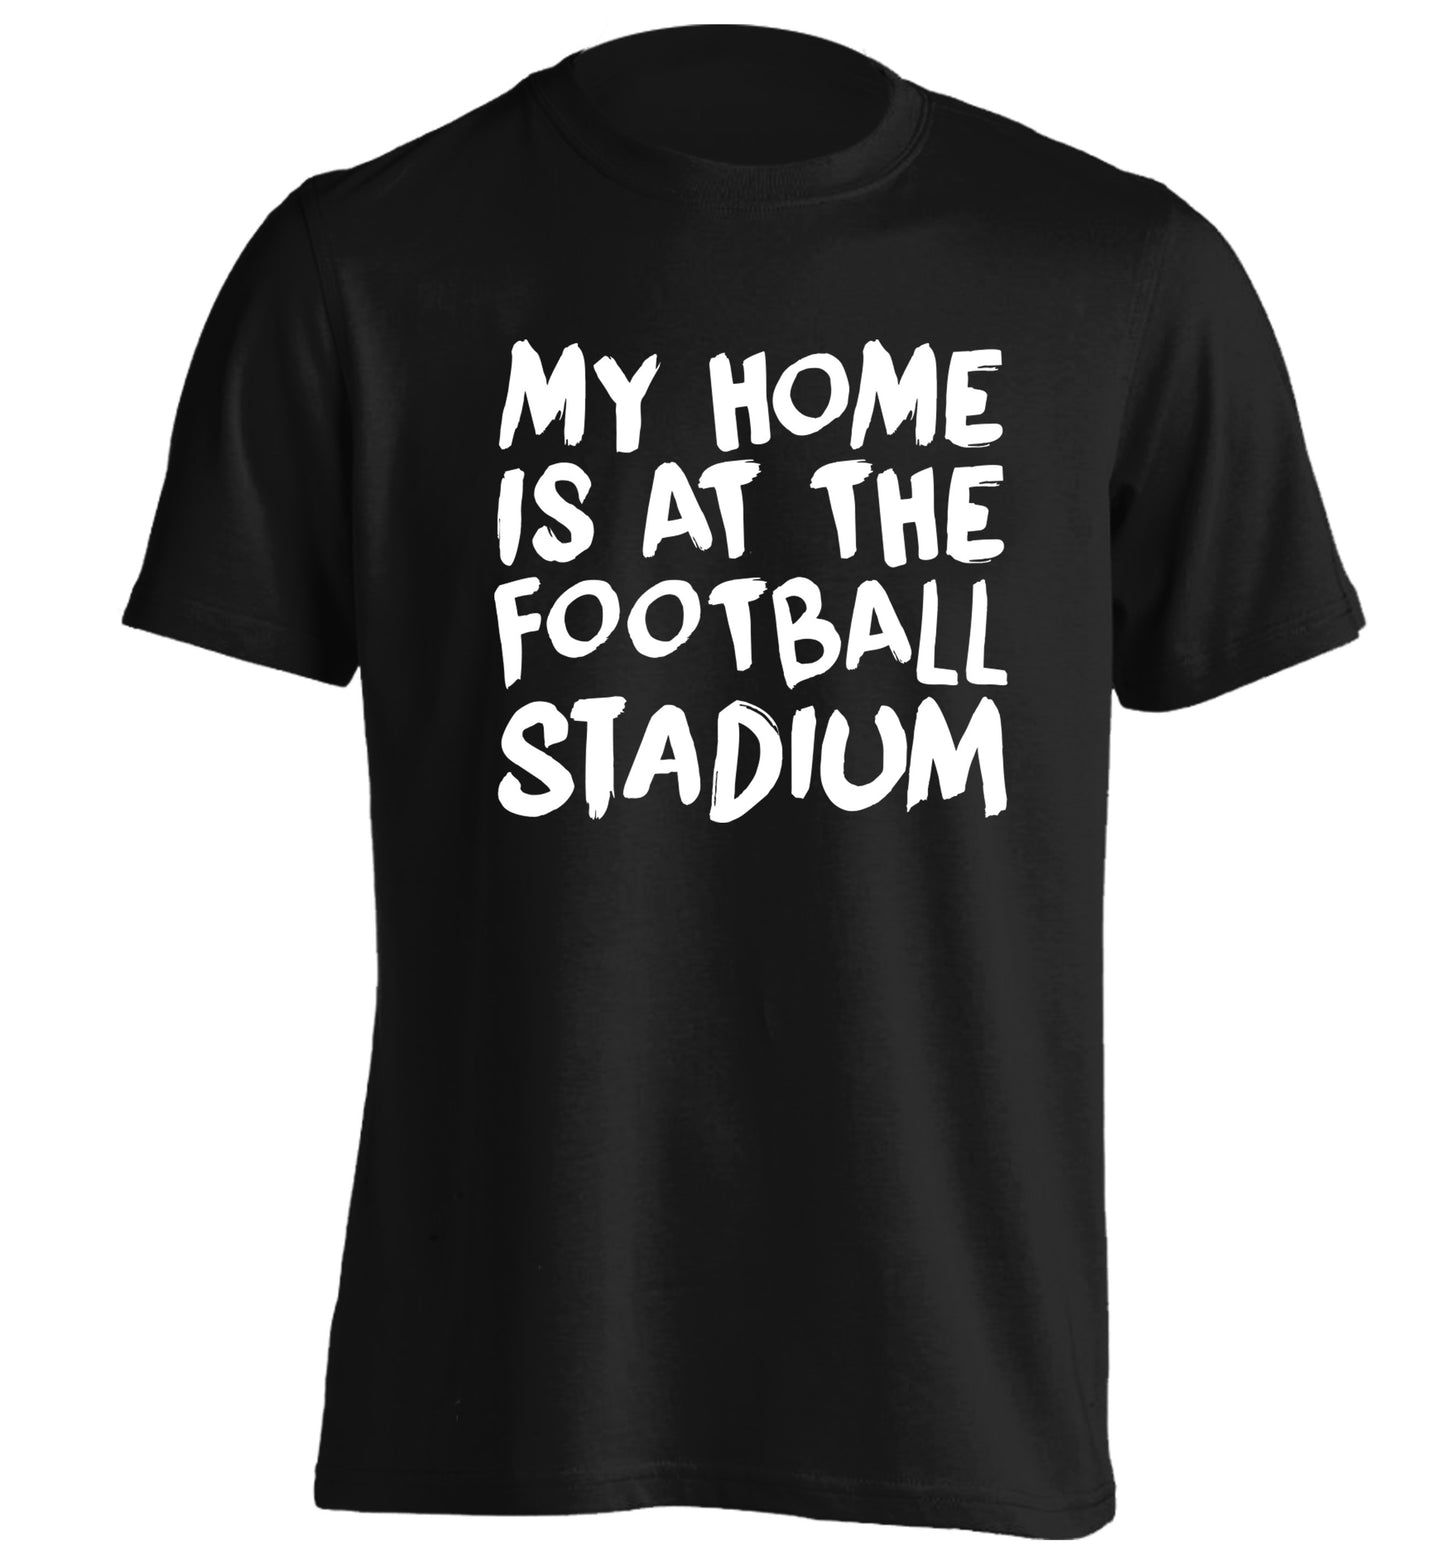 My home is at the football stadium adults unisex black Tshirt 2XL